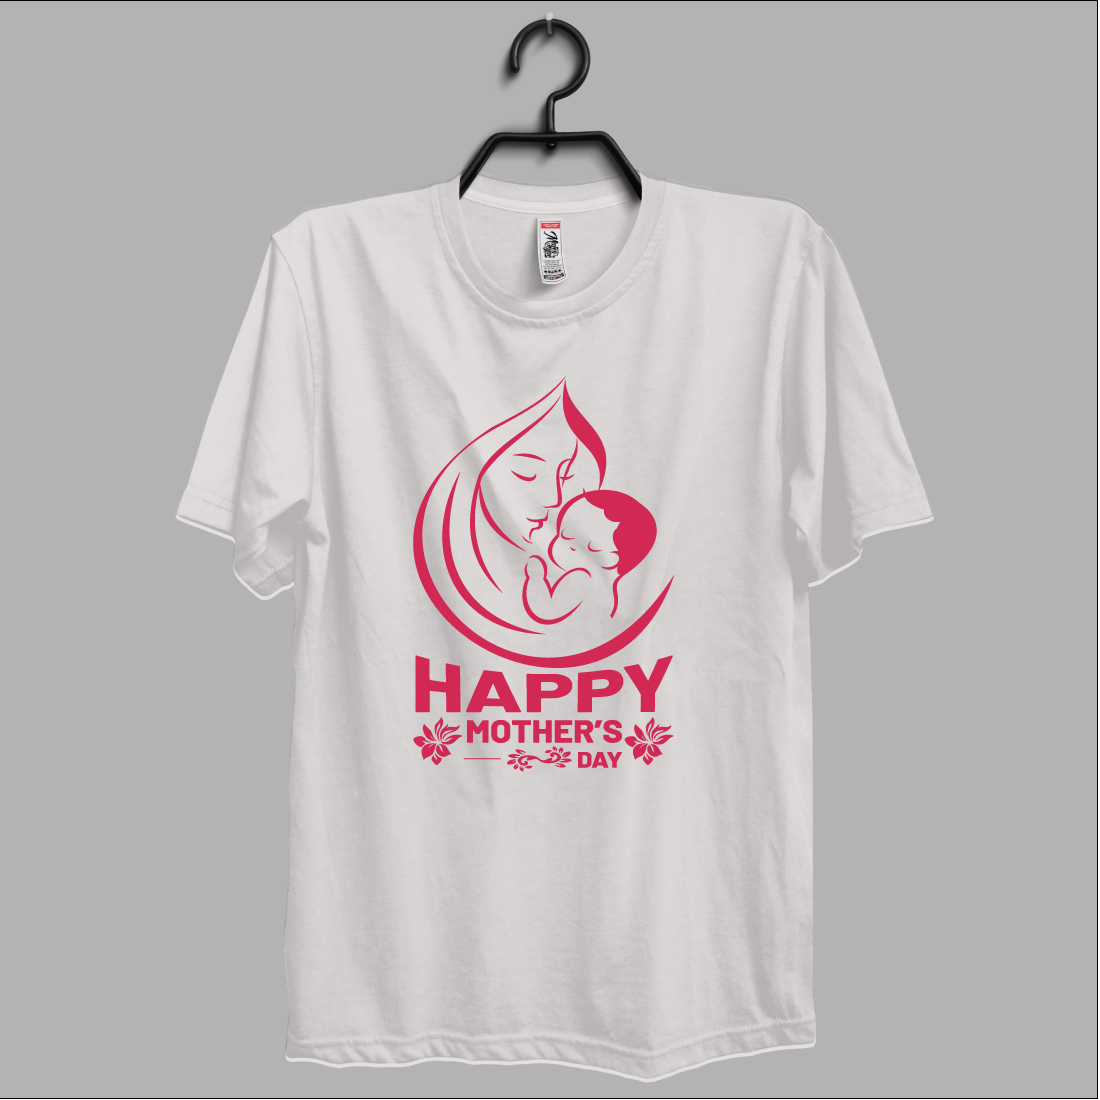 mothers day t shirt design 4 347